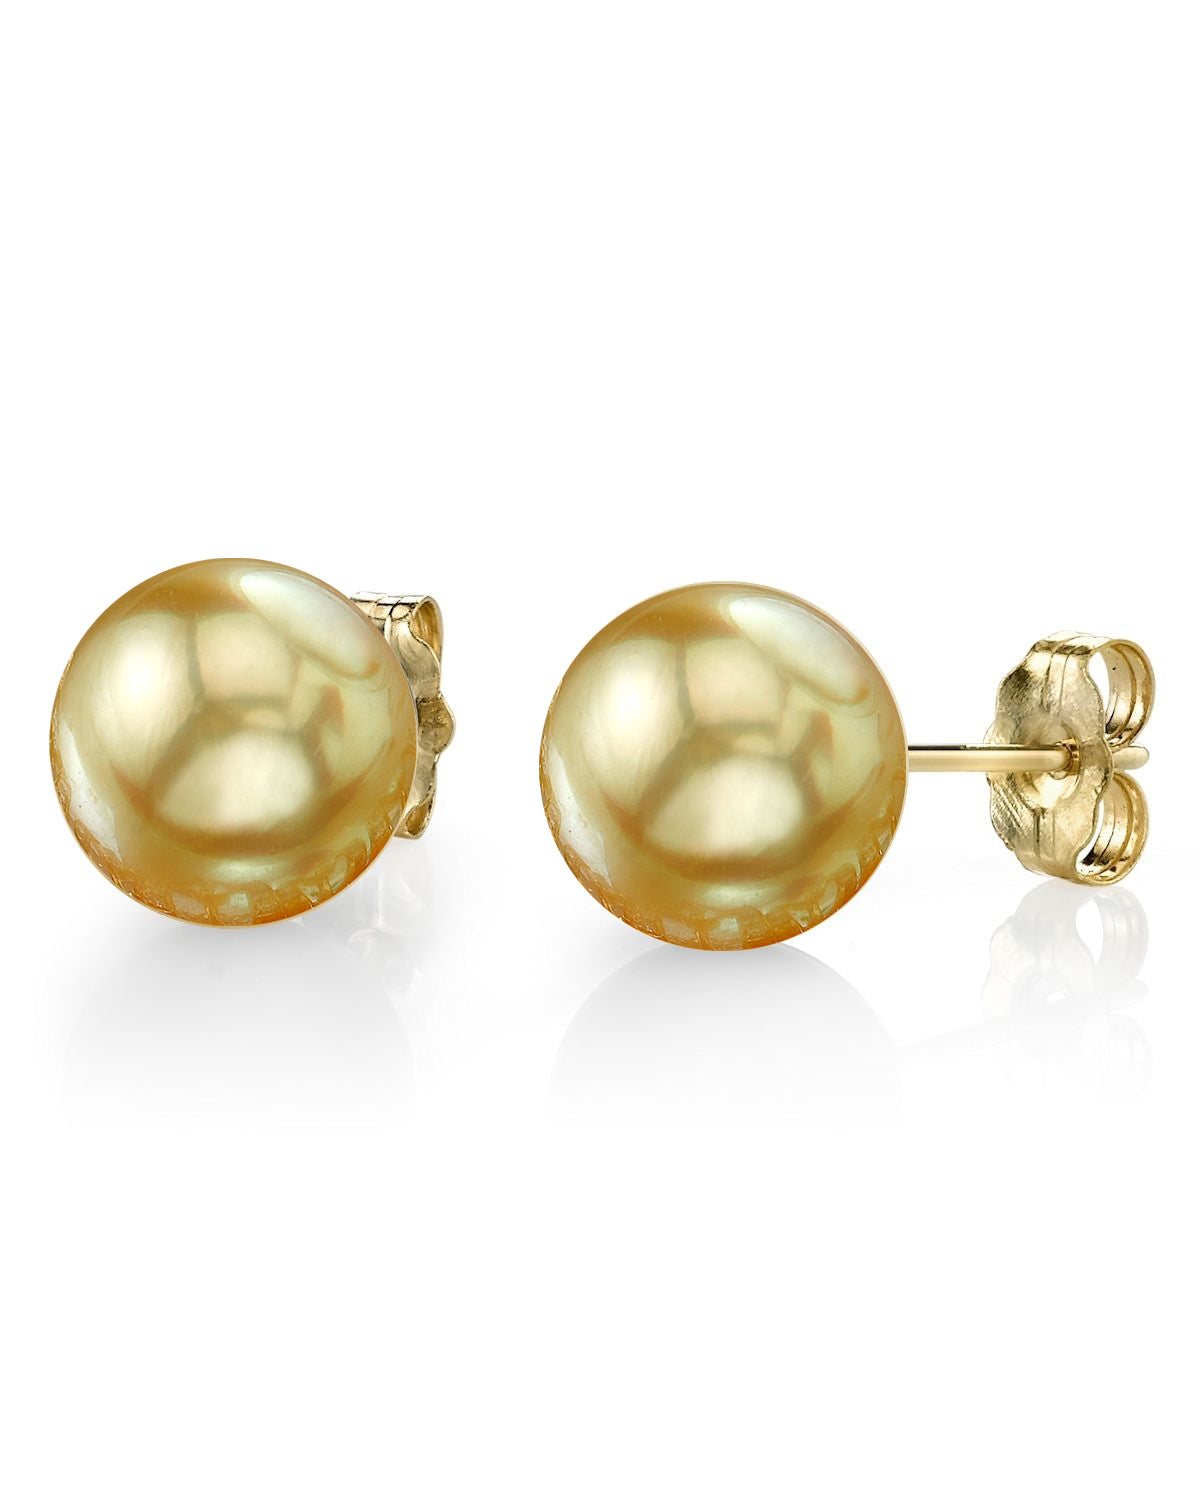 8-8.5 MM Cultured Freshwater Pearl Earrings with Curb Chain in Yellow Gold  Plated Sterling Silver - CBG003259